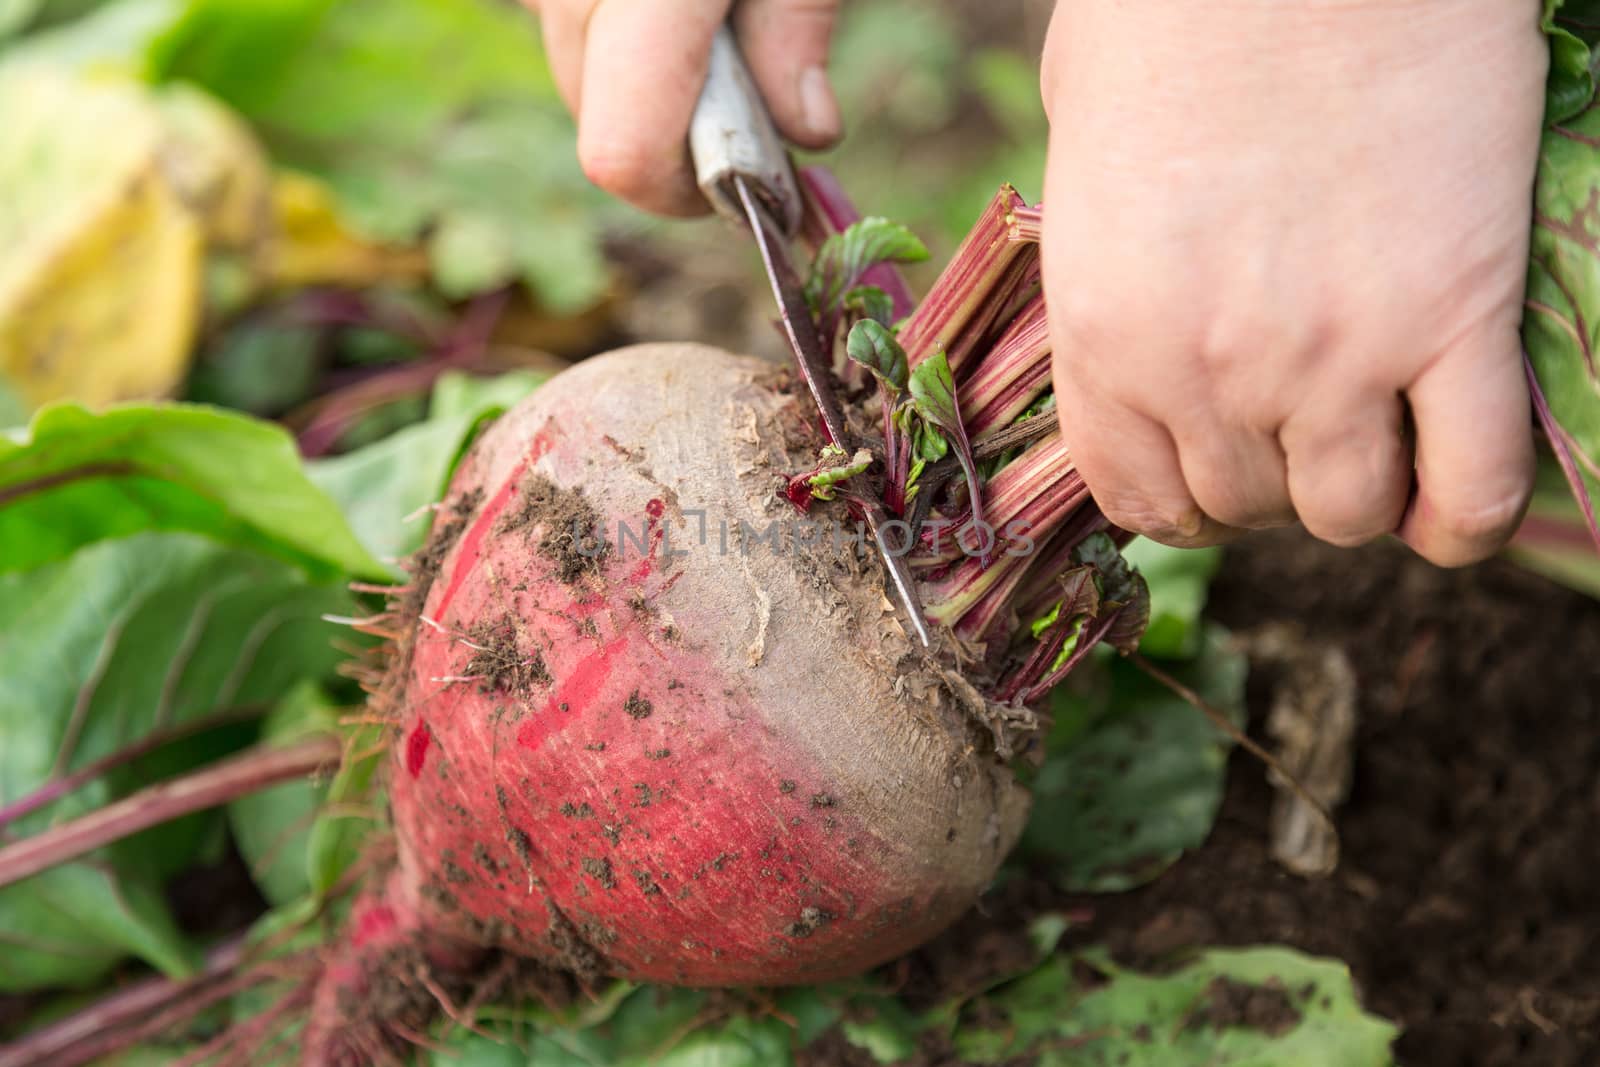 Hand cleaning young beetroot with knife